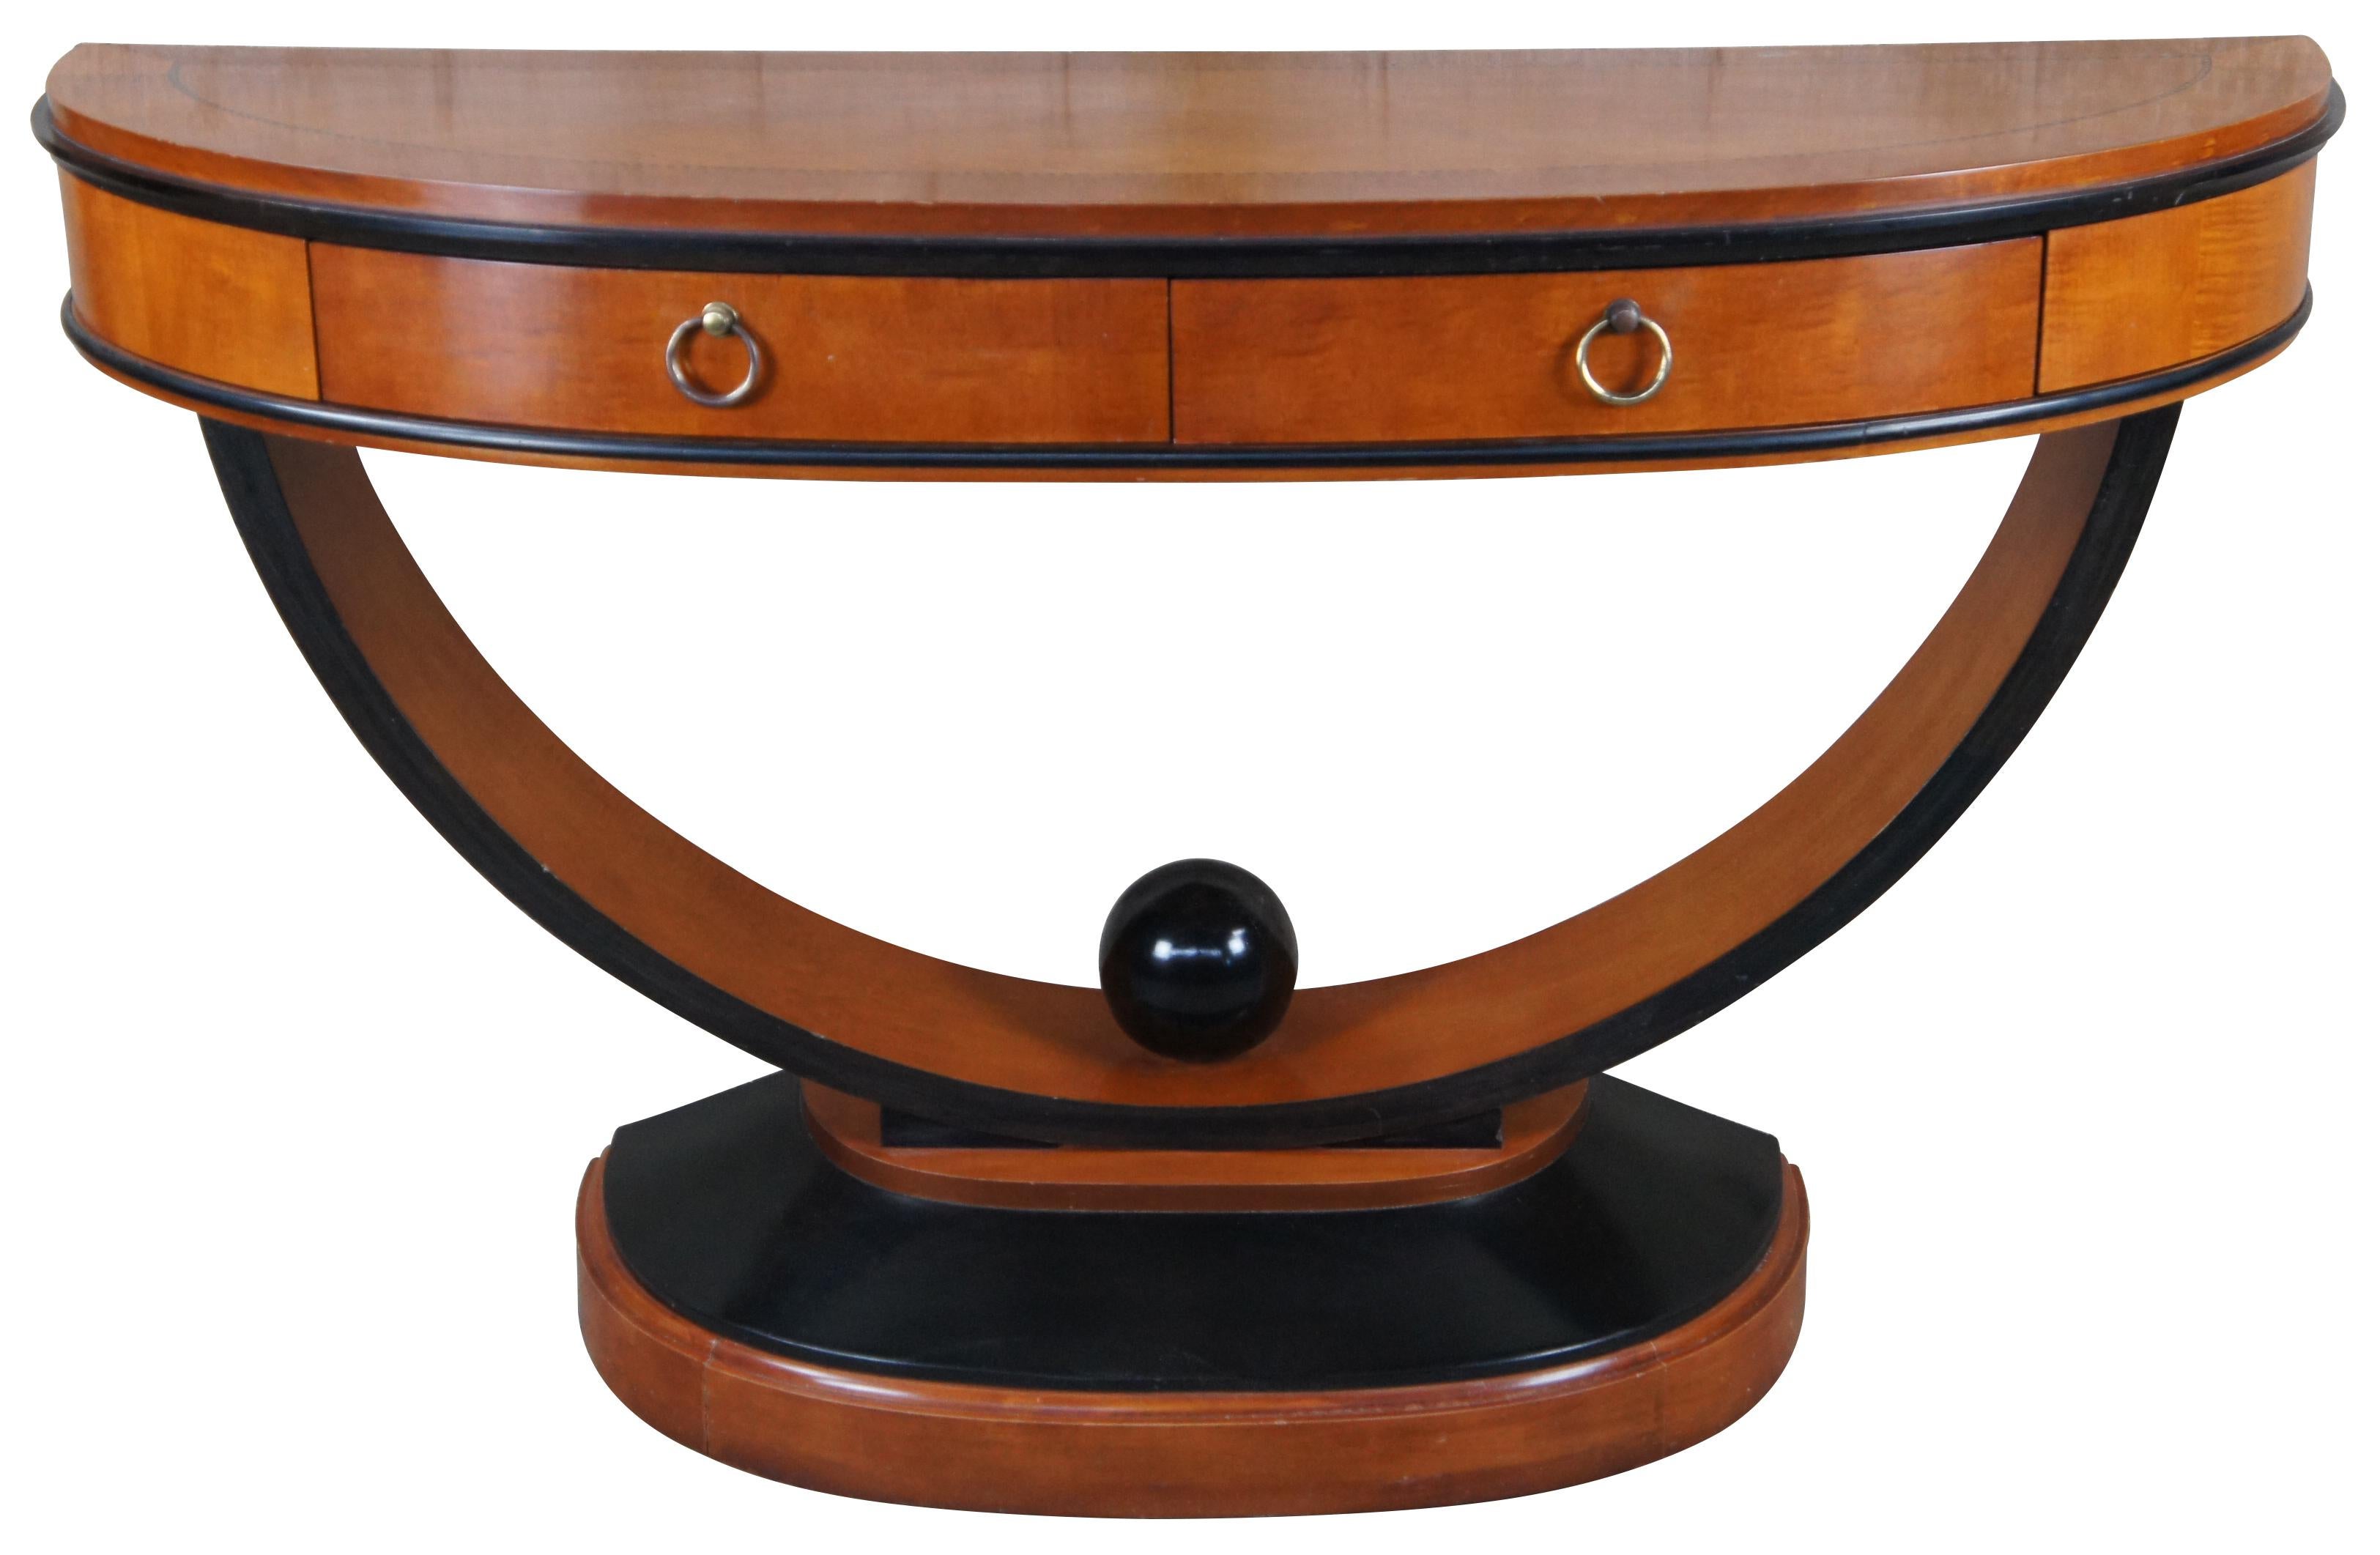 1990s National Mt. Airy Biedermeier Console server and mirror. A demilune or crescent shape made from maple with ebolized accents and inlay along top. Features two felt lined serving drawers and outer hidden cabinets that pop open via magnetic